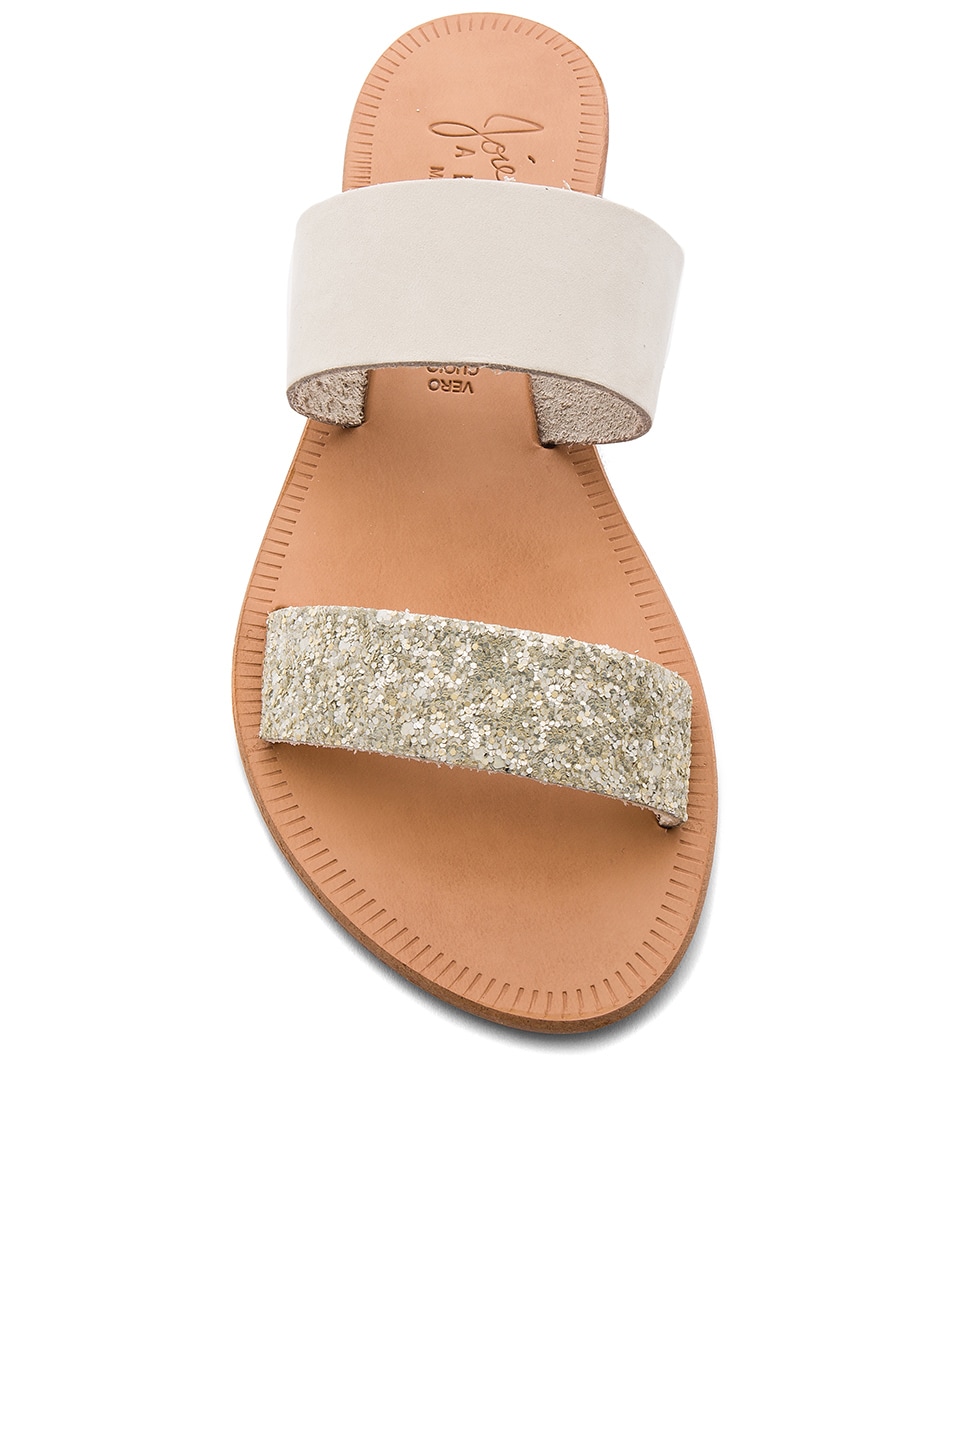 2 Stores In Stock: JOIE Sable Glitter Slide Sandals, Nude | ModeSens